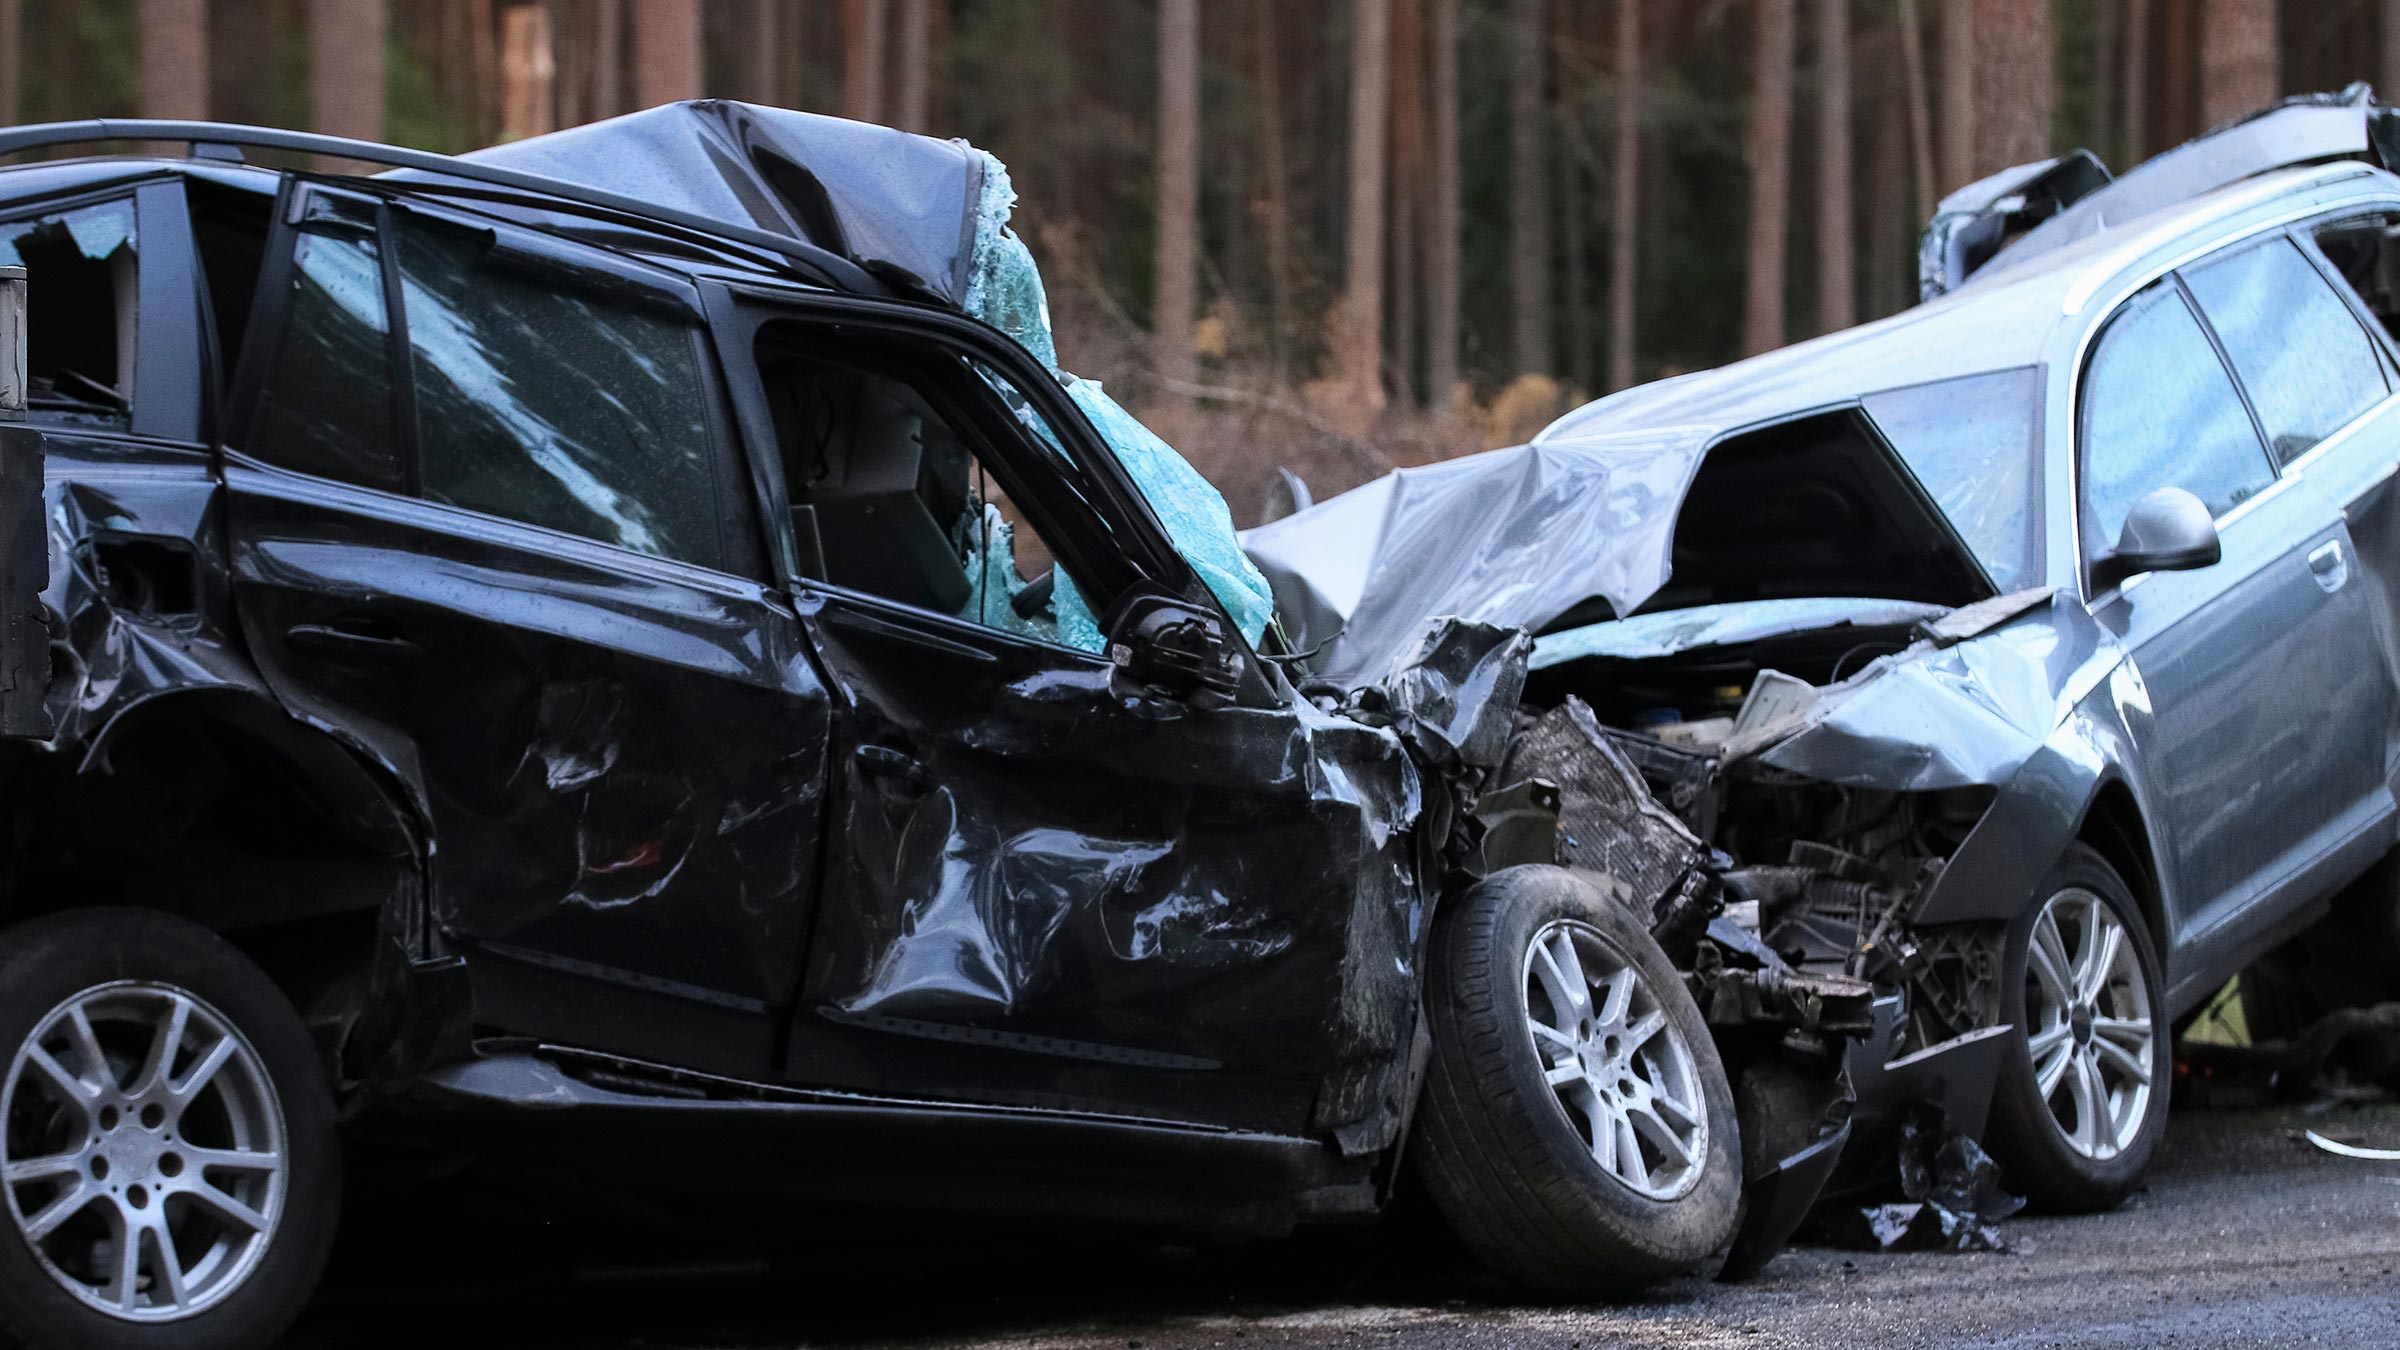 2 cars that have had a very bad crash